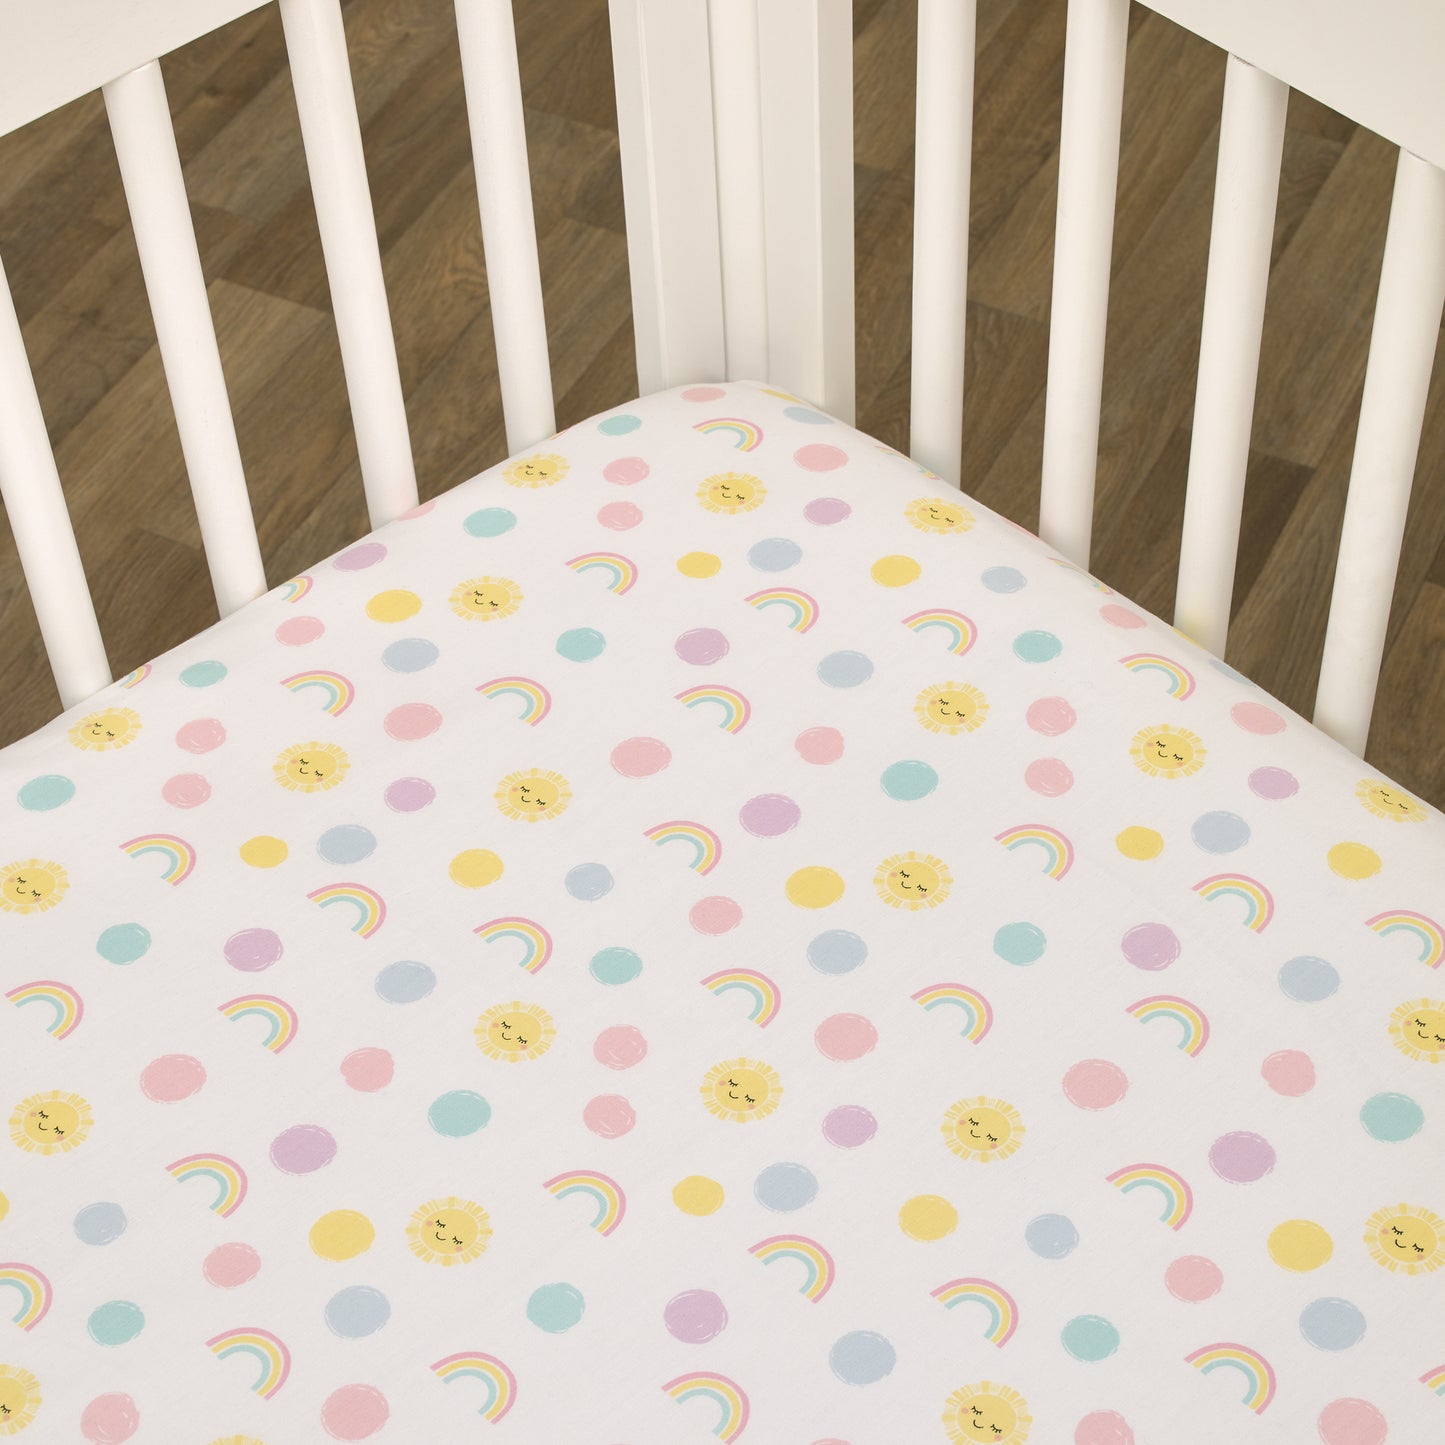 NoJo Happy Days Multicolored Rainbows and Suns 100% Cotton Nursery Fitted Crib Sheet.